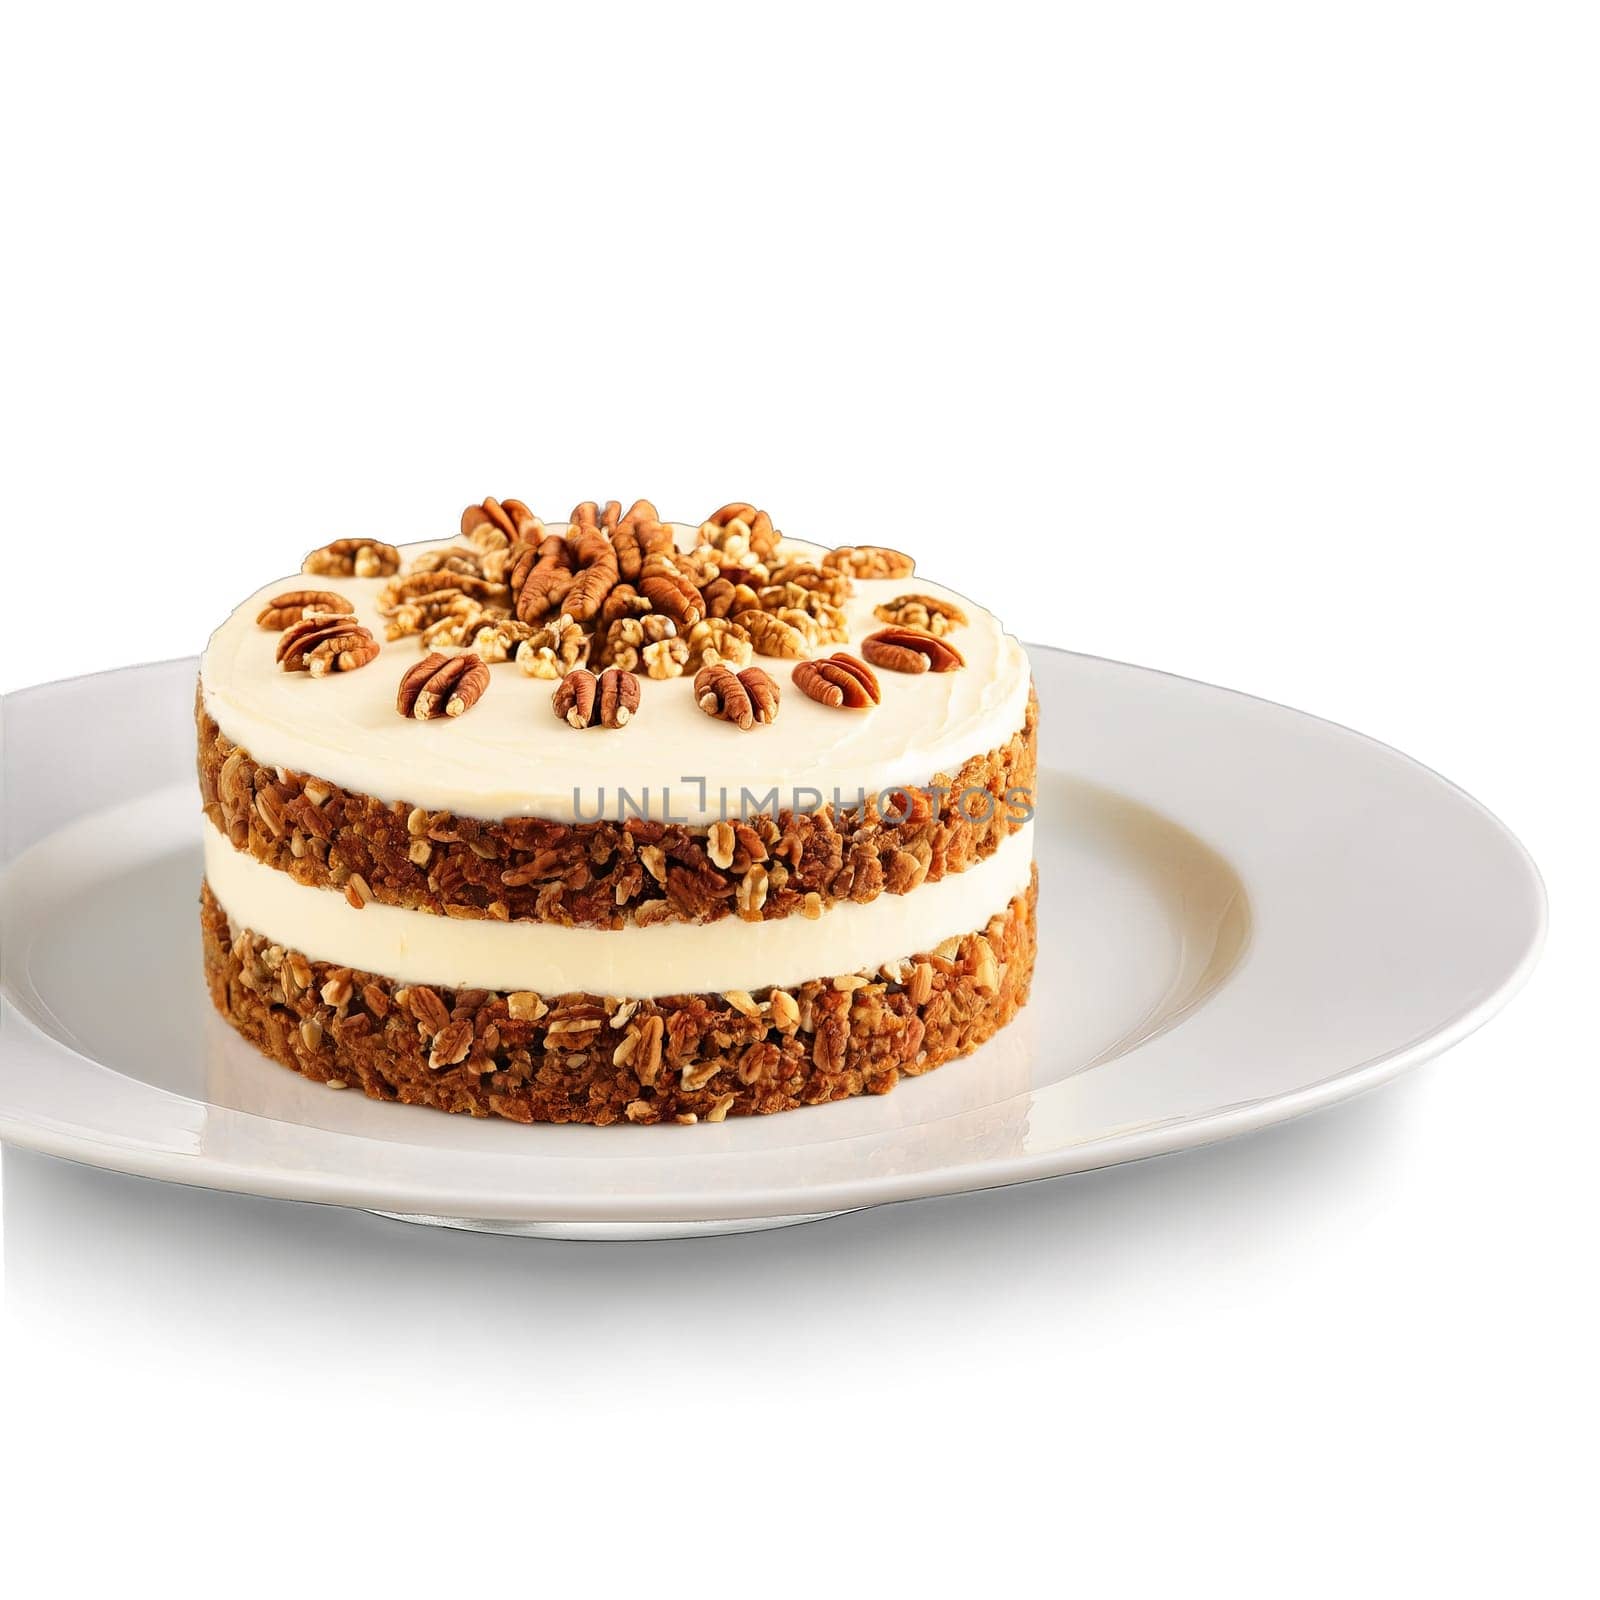 Carrot cake with moist texture visible carrot shreds cream cheese frosting chopped walnut garnish Culinary. close-up cake, isolated on transparent background